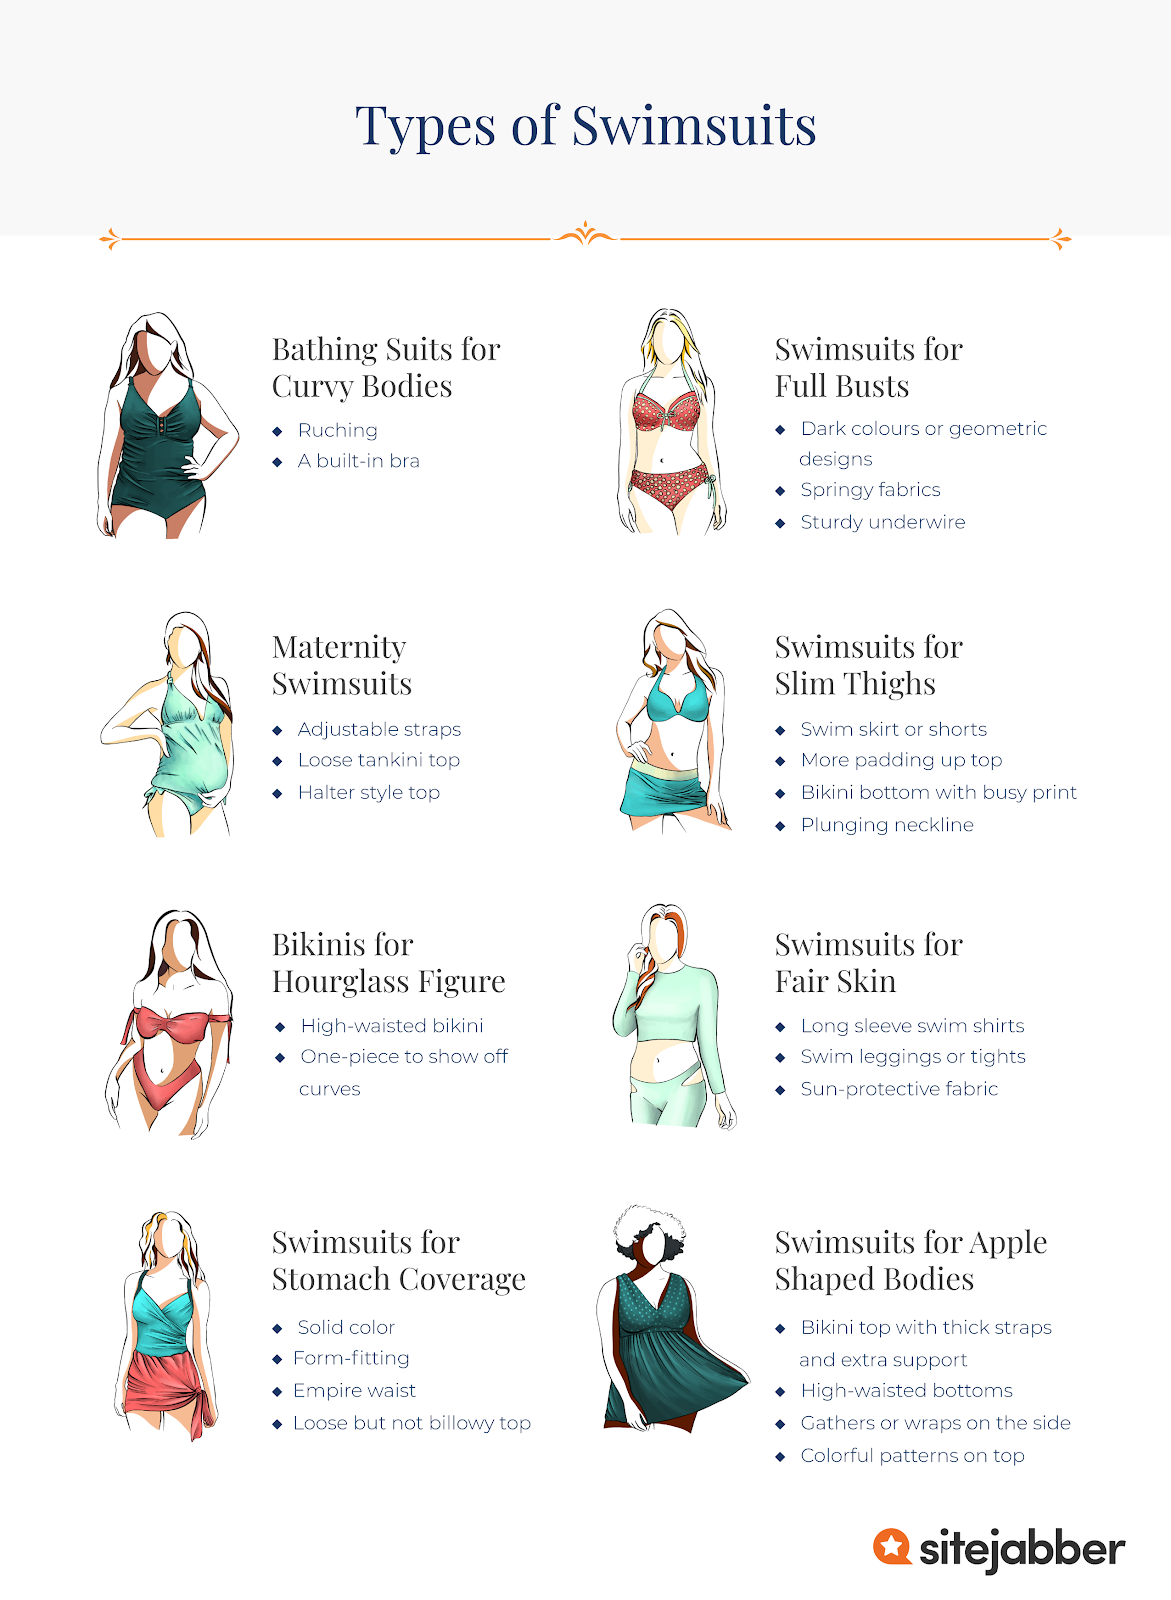 How to Choose a Swimsuit for All Body Types, Budgets and Styles